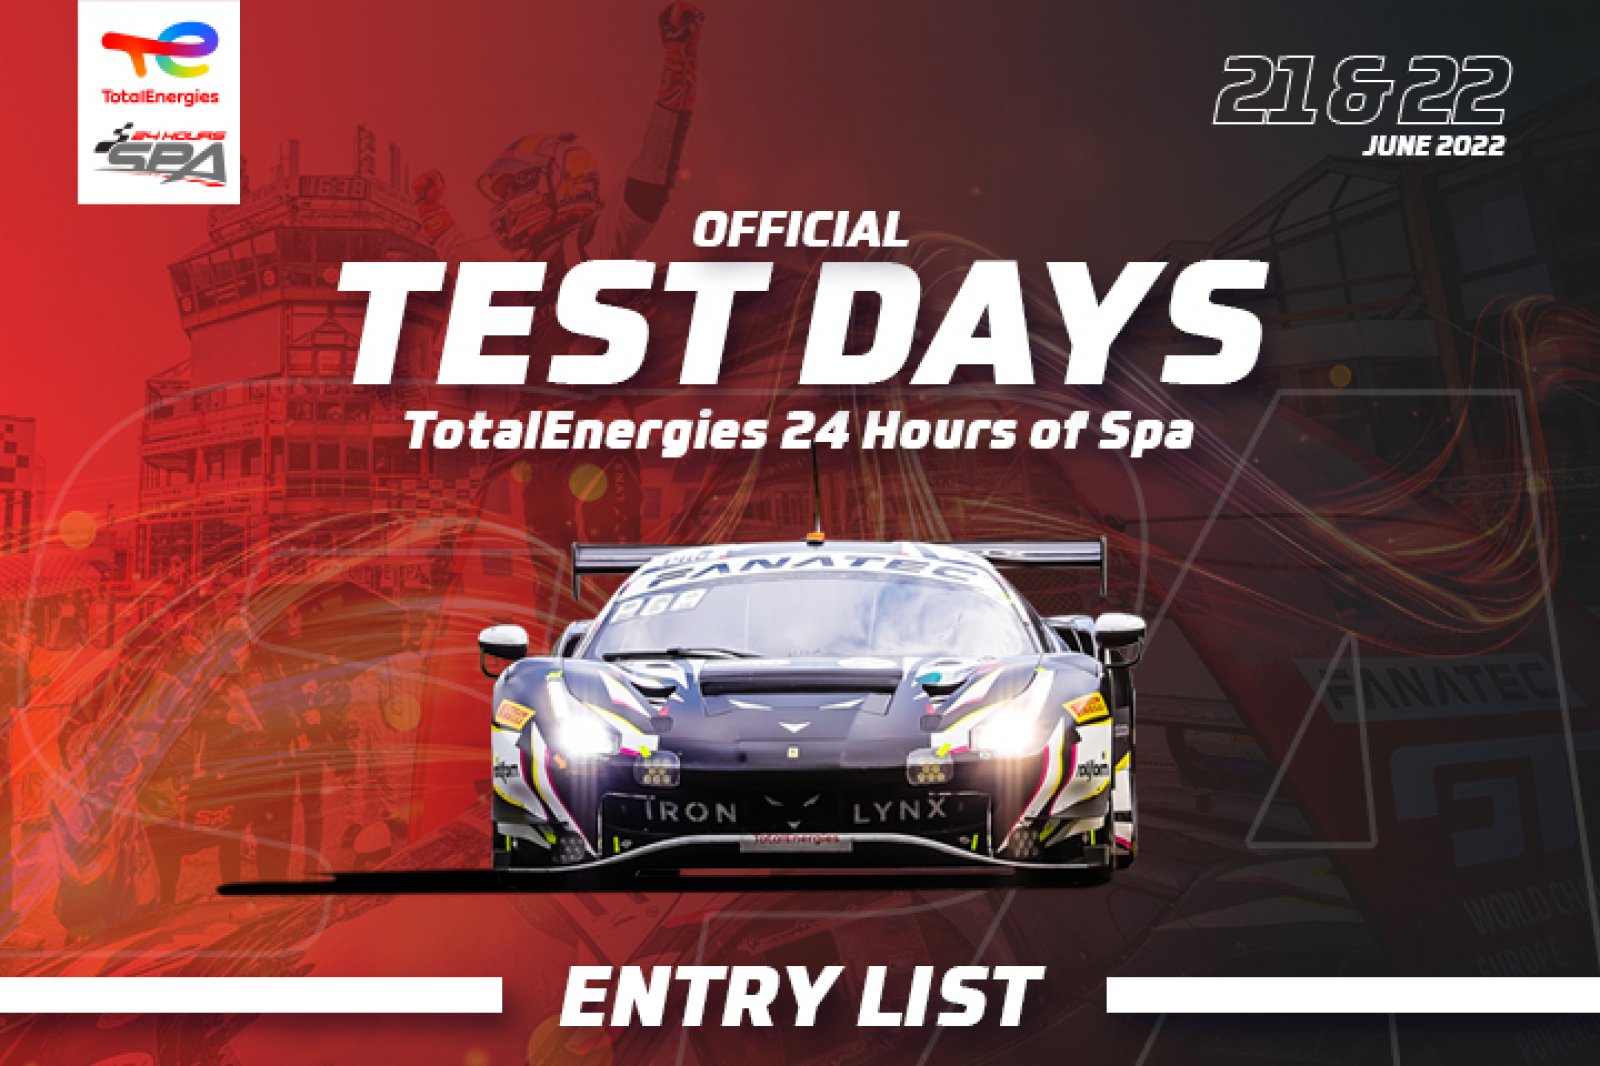 Official test days begin final countdown to 2022 TotalEnergies 24 Hours of Spa